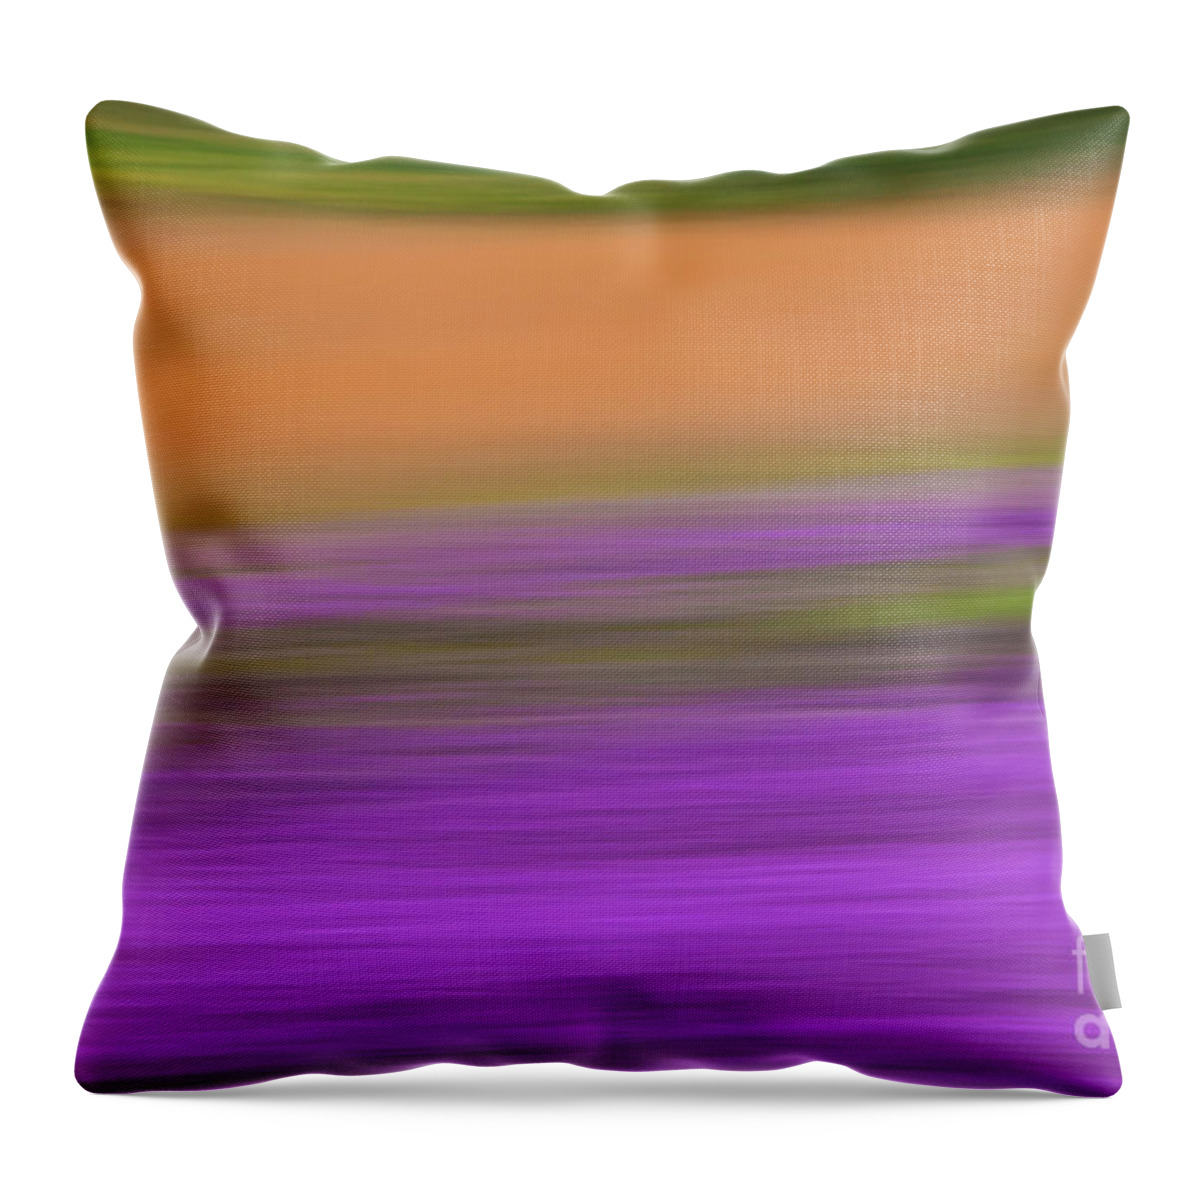 Abstract Throw Pillow featuring the photograph Henbit Abstract - D010049 by Daniel Dempster